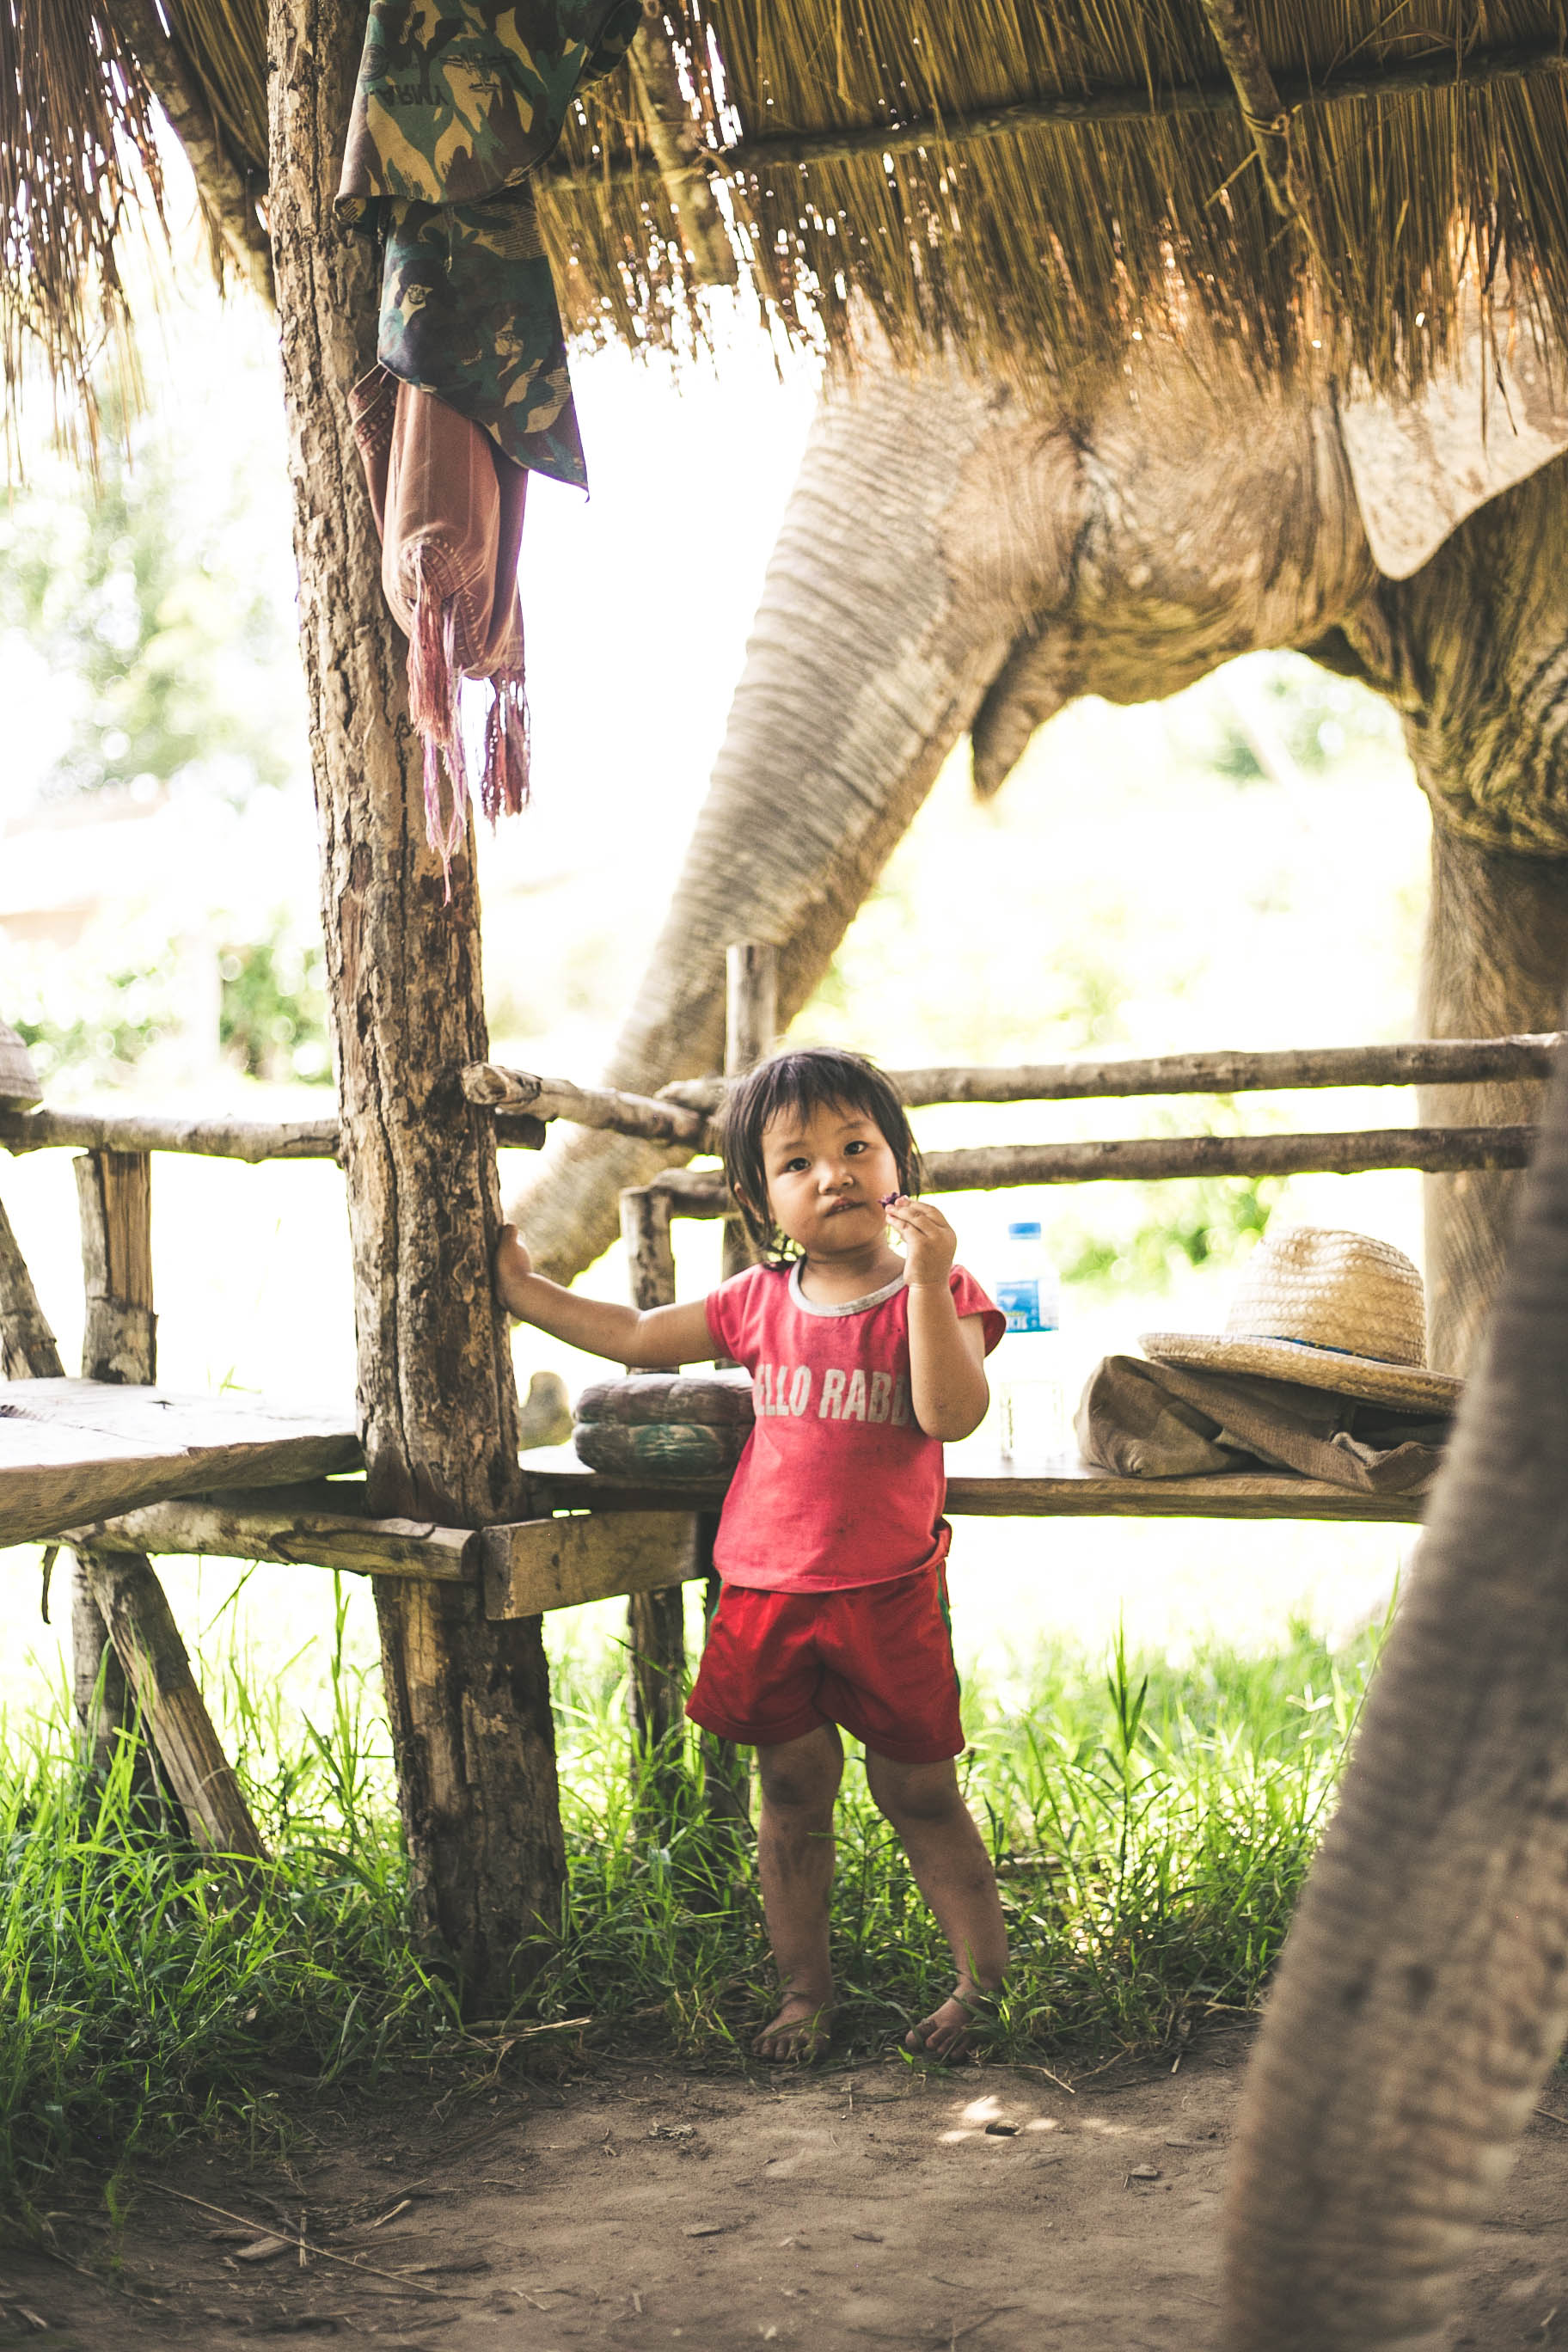 stage of growing in the Karen Tribe. While the young girl grows, theres no fear, these Elephants are her family.